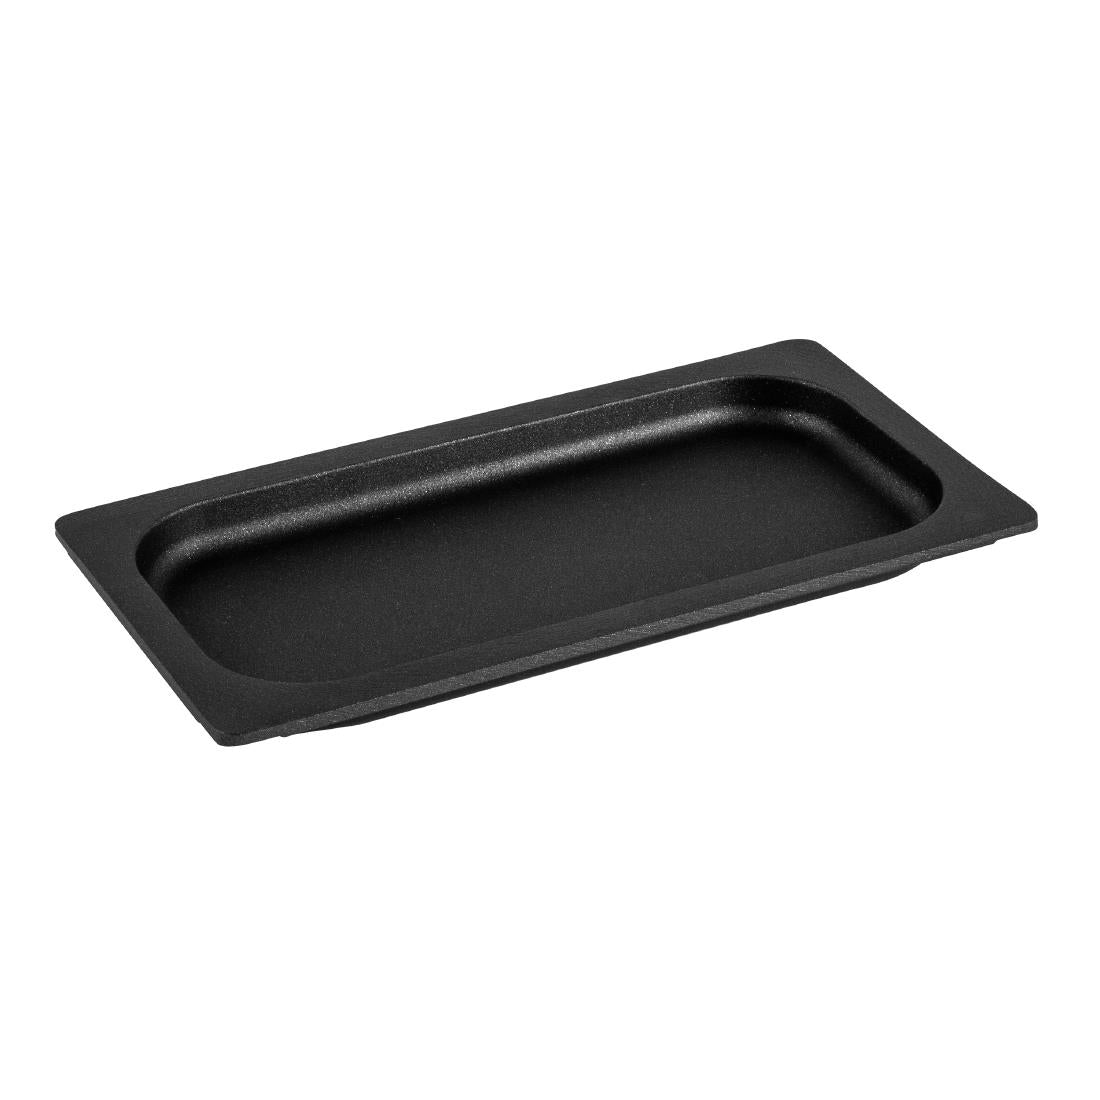 AT311 Josper Charcoal Oven 1/3 Gastronorm Tray 20mm